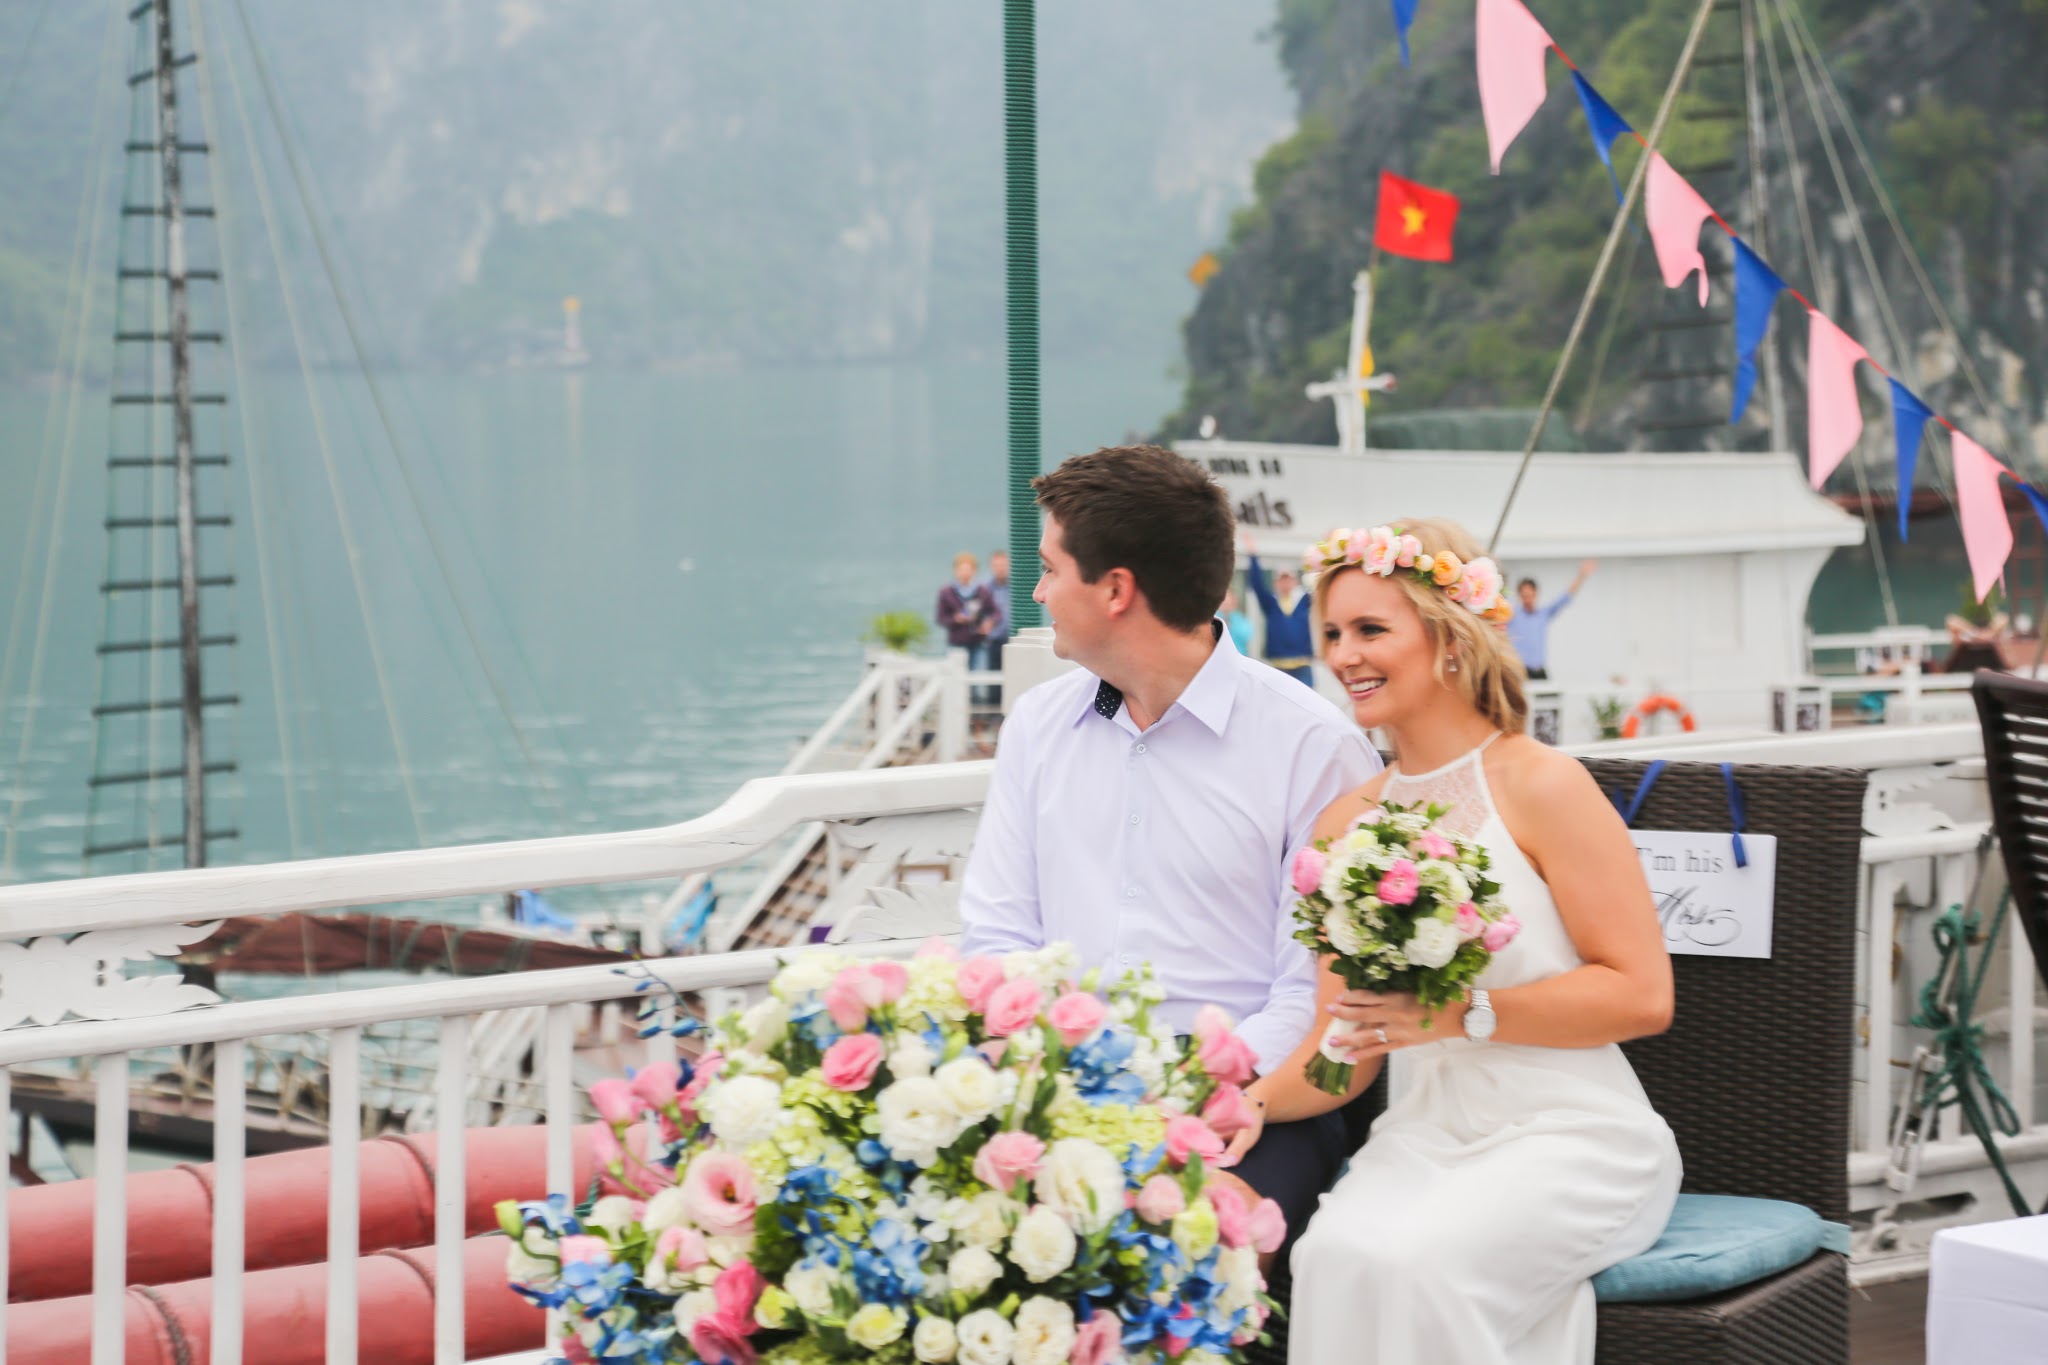 Wedding ceremony in Halong is unforgettable memory